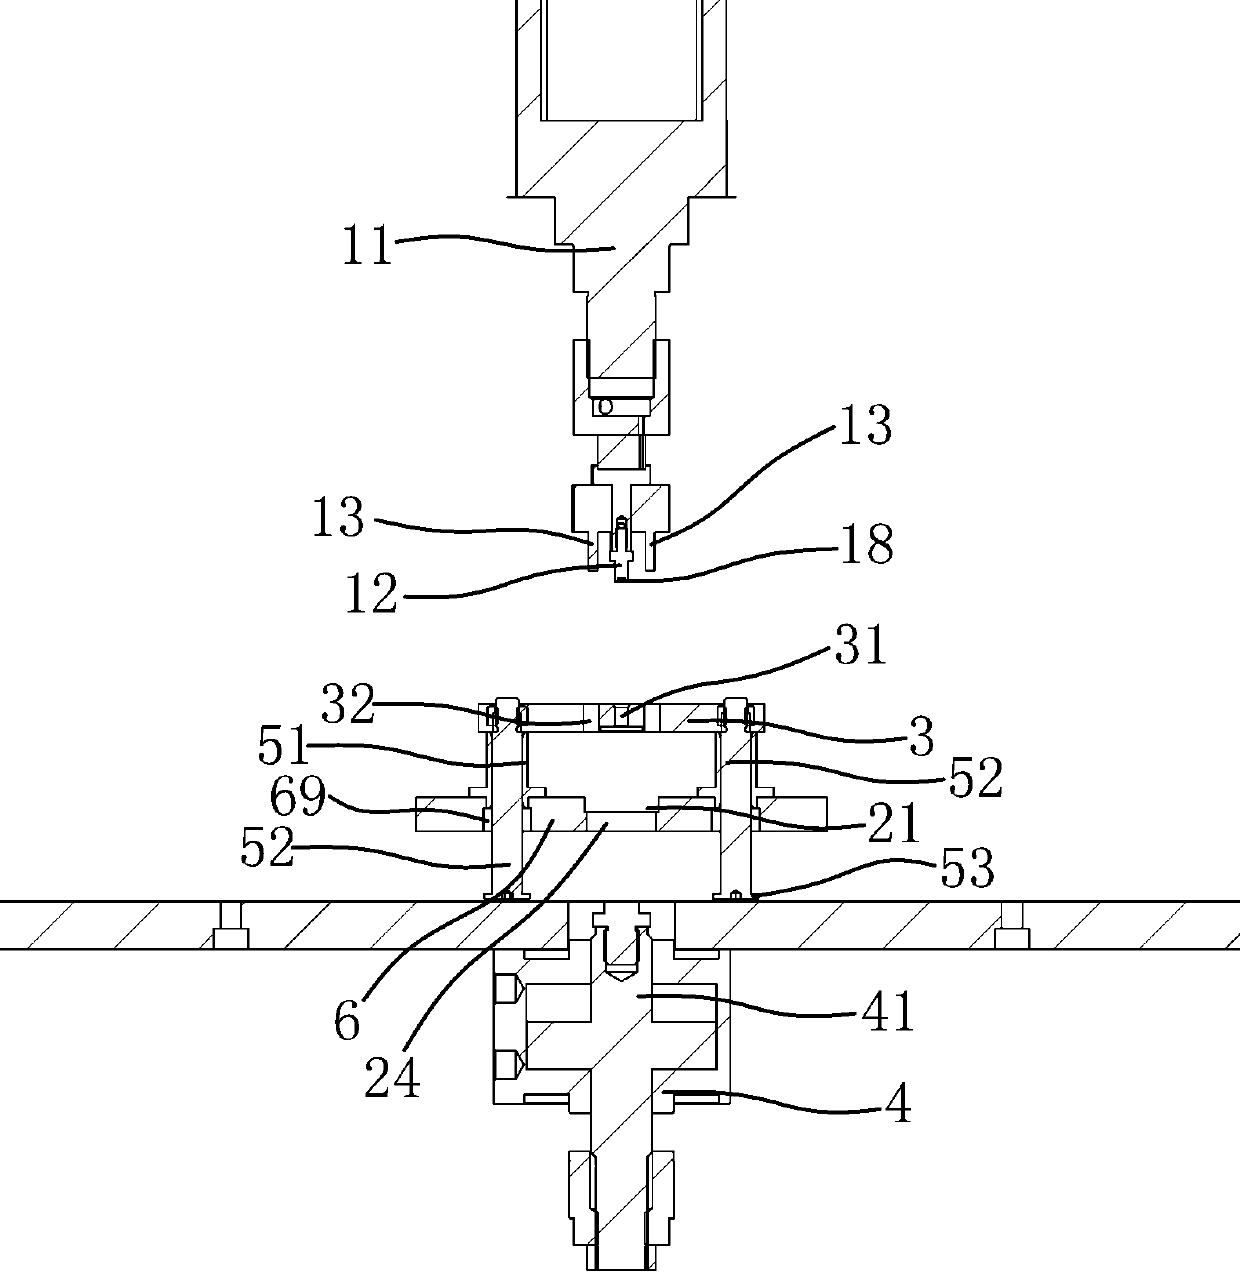 Press fitting device for starting gear on motor shaft